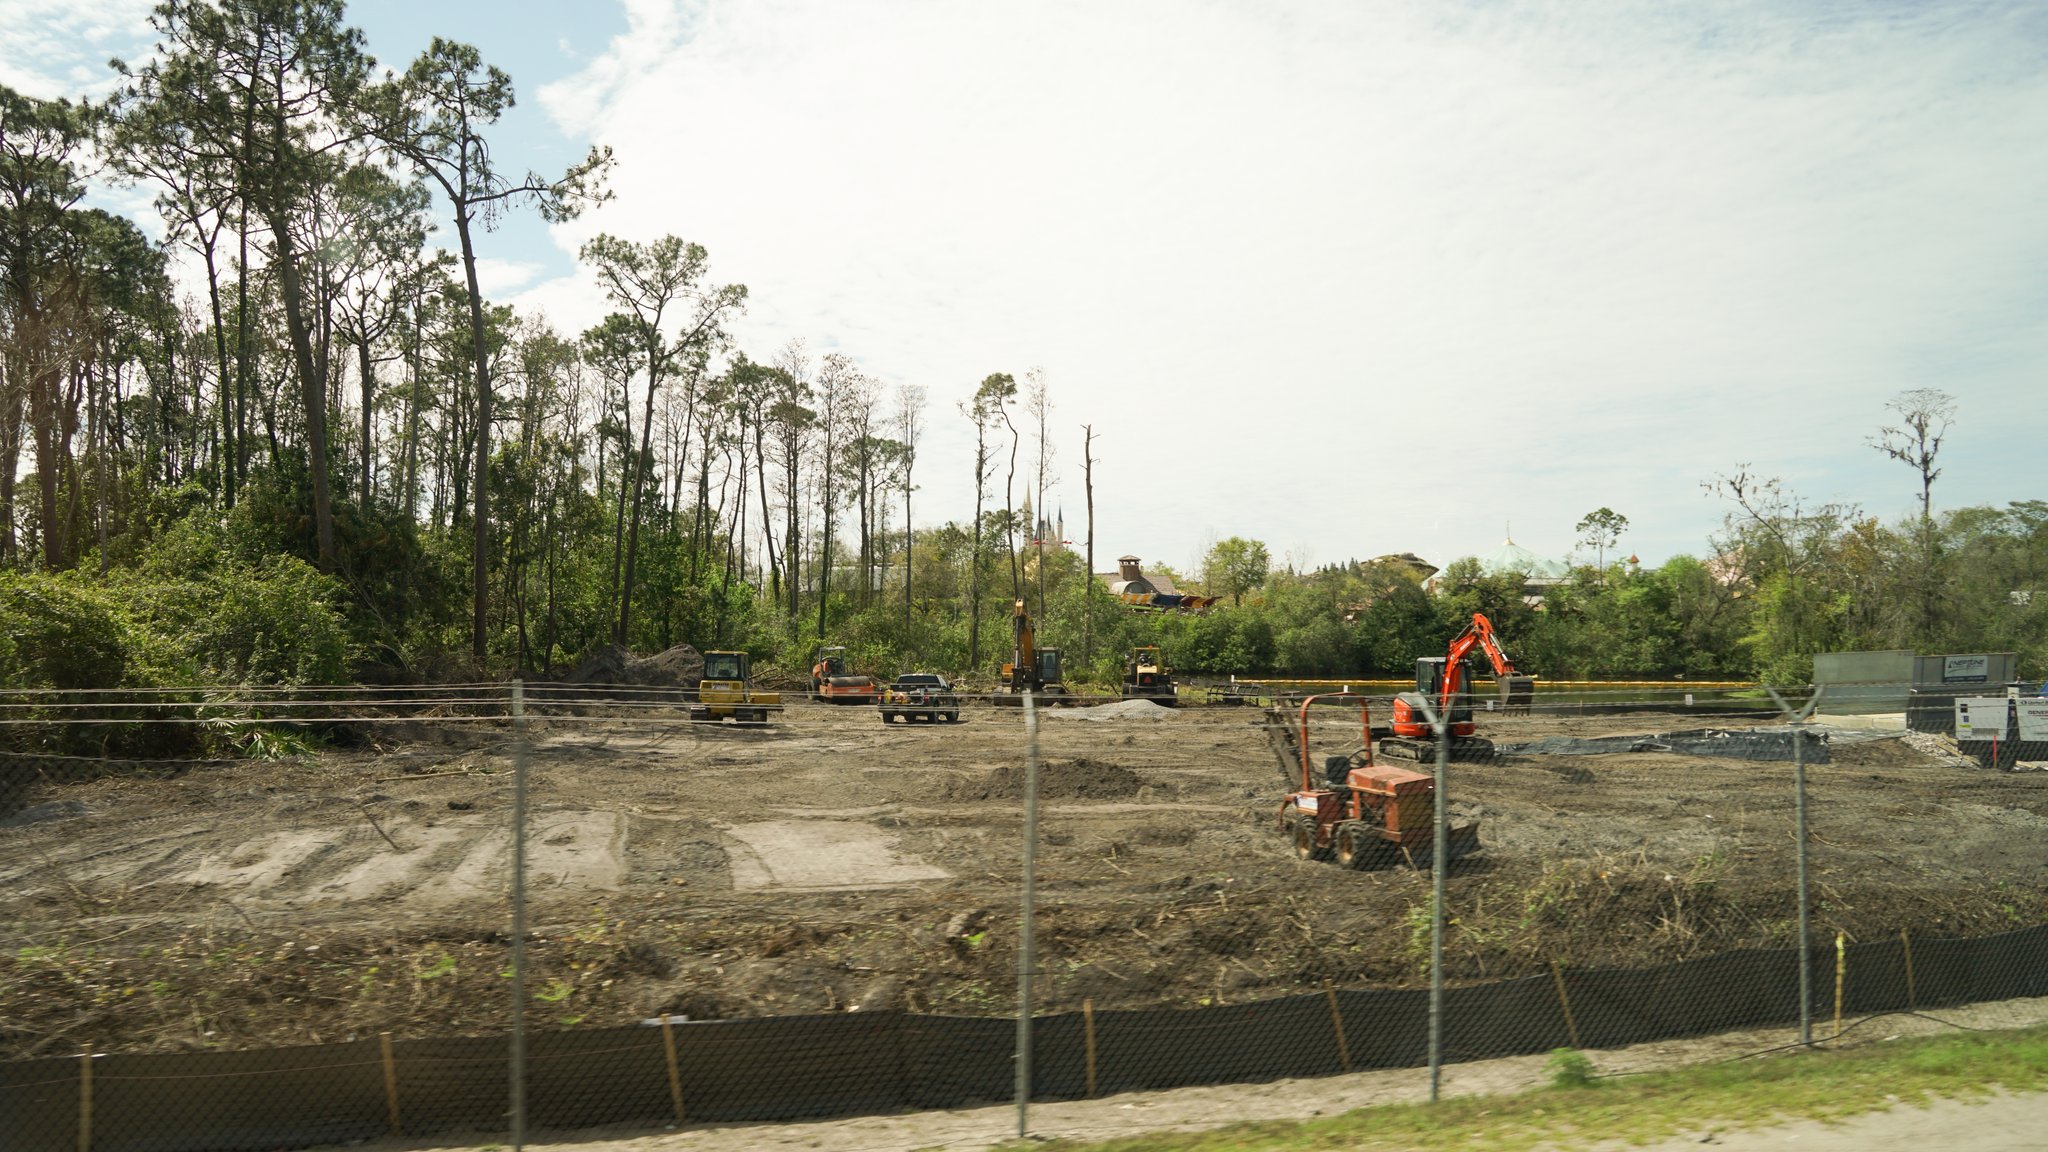 Land clearing continues for the Tron coaster at the Magic Kingdom ...